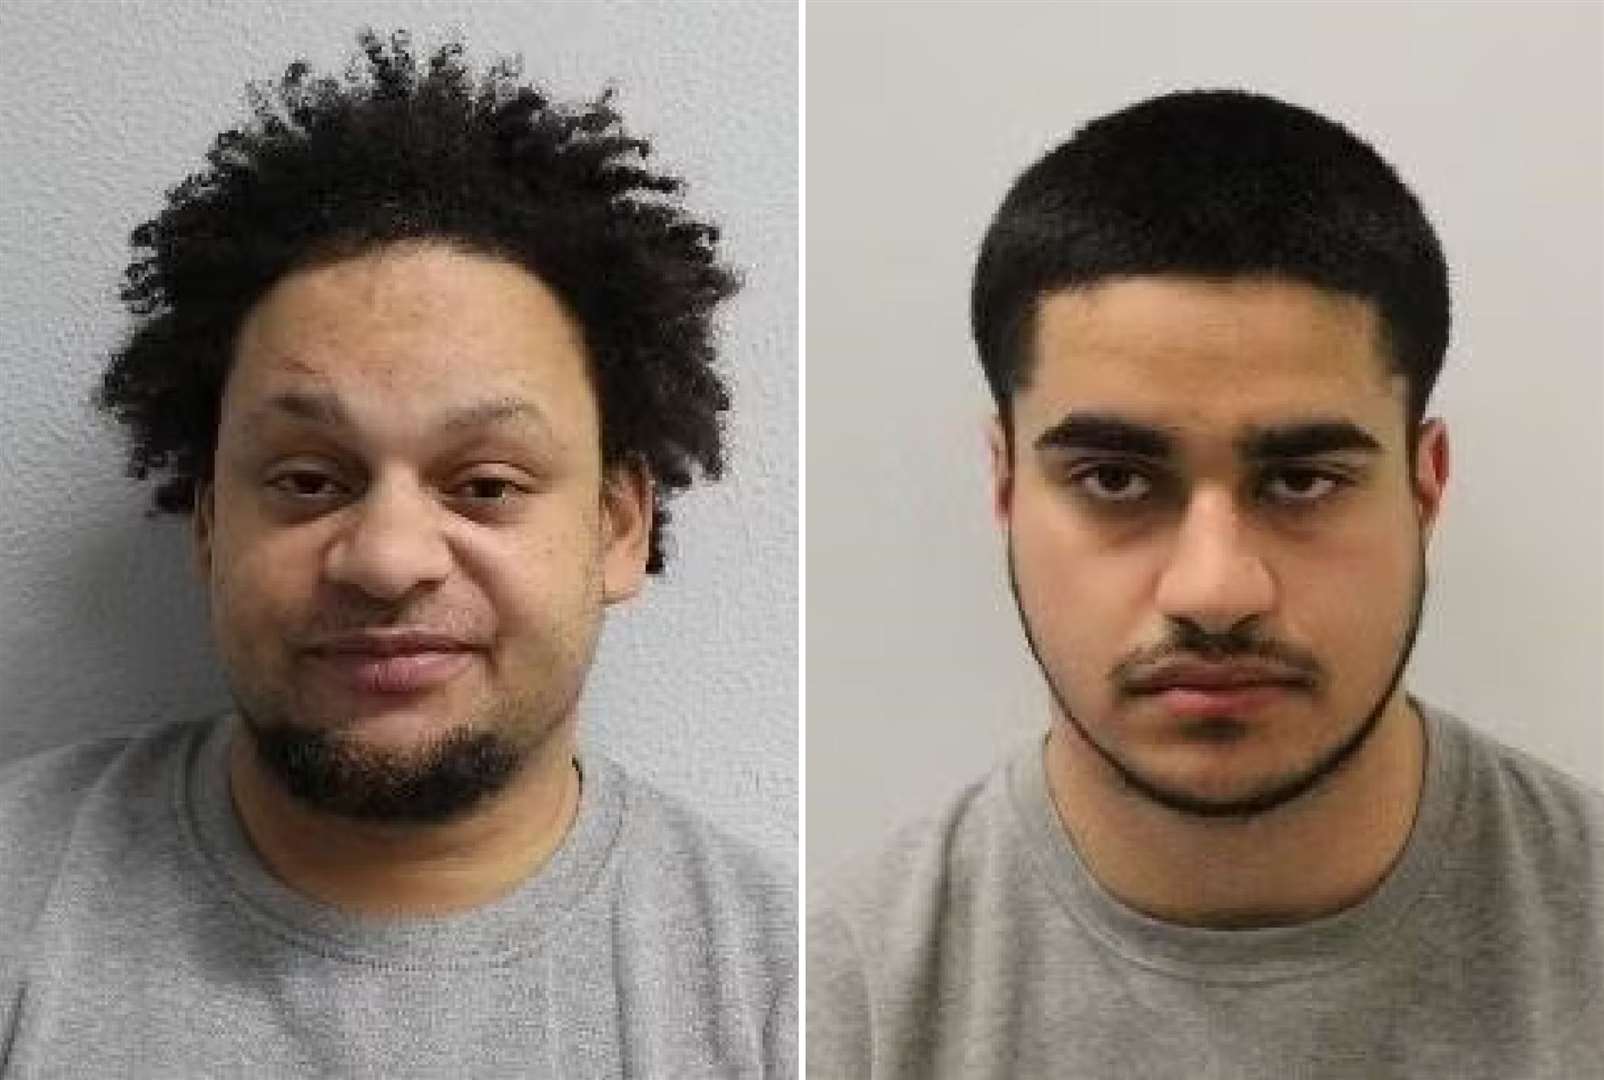 Karl Black, 43, of Cassiobury Road, E17 and Jabir Sitar, 21, of Clacton Road, E17, were found guilty of murder at the Old Bailey. Picture: Metropolitan Police